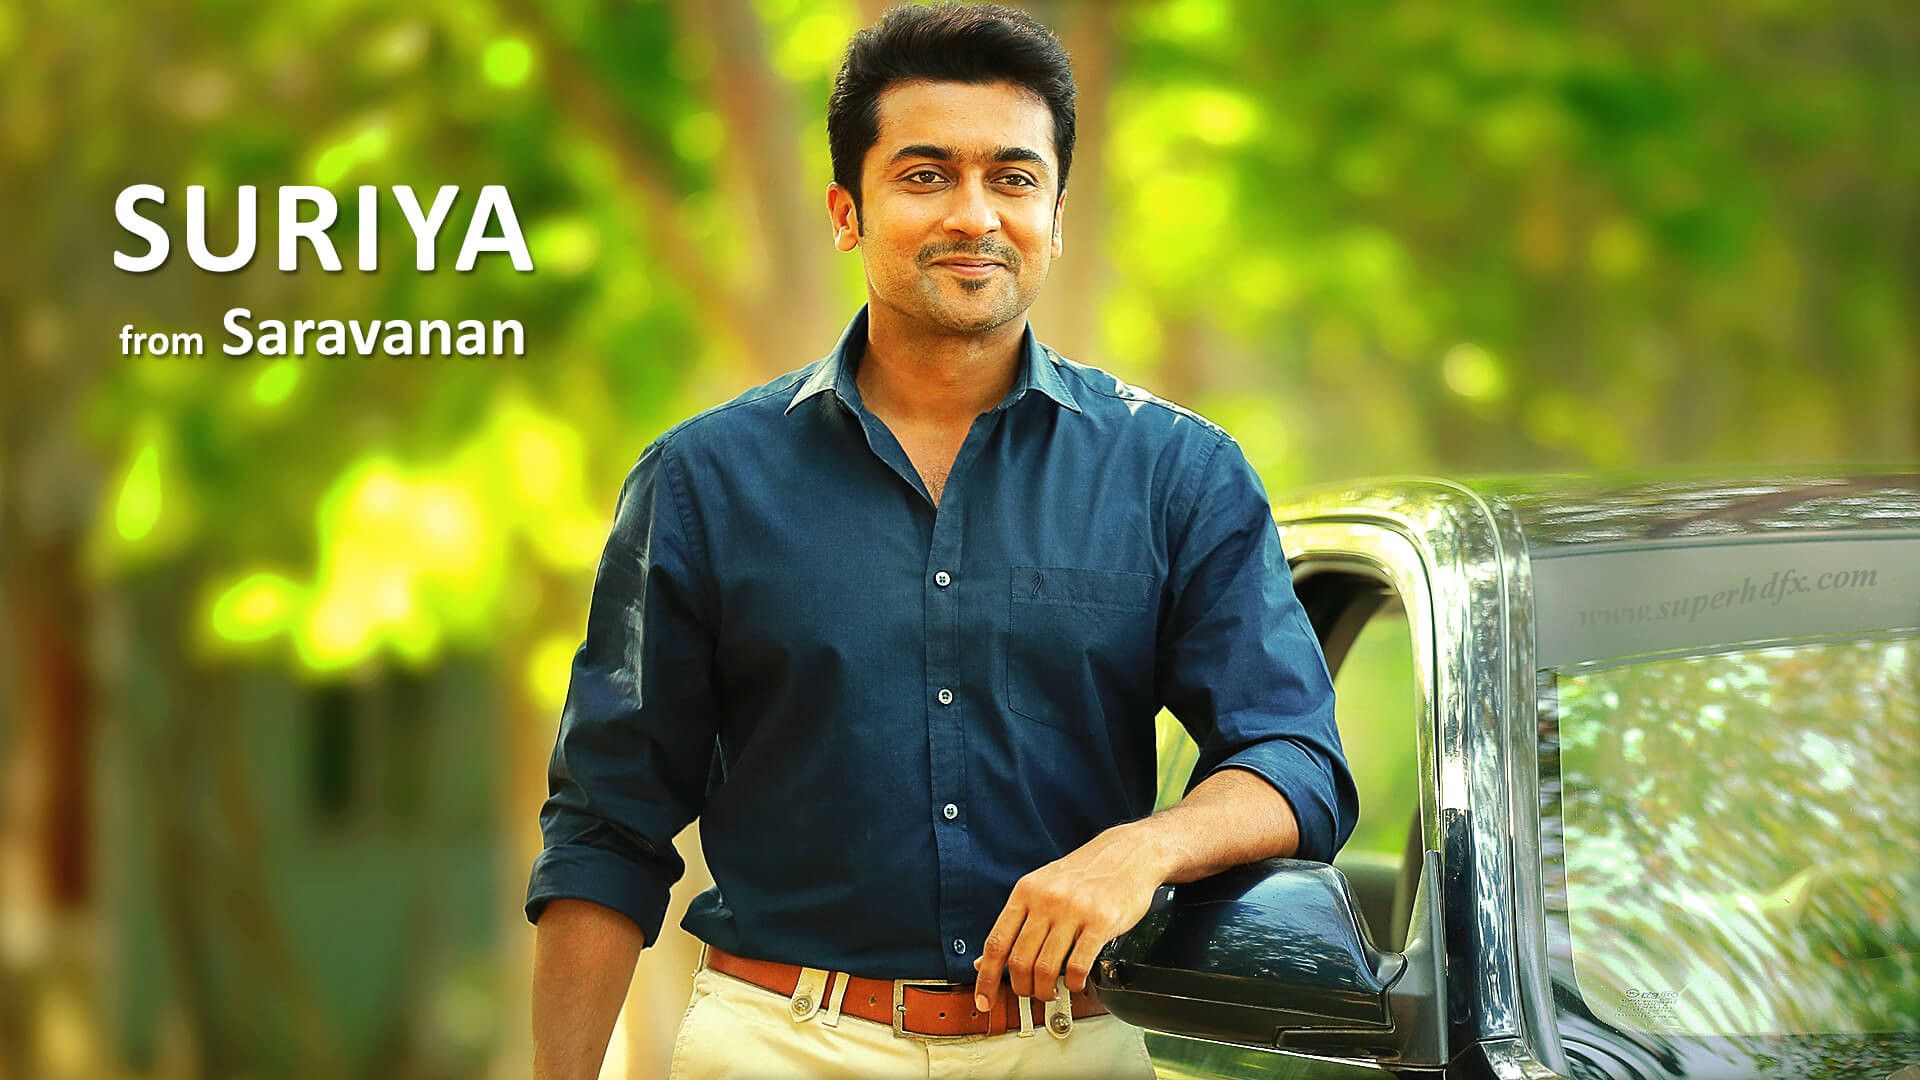 Surya Images HD - Wallpaper Cave